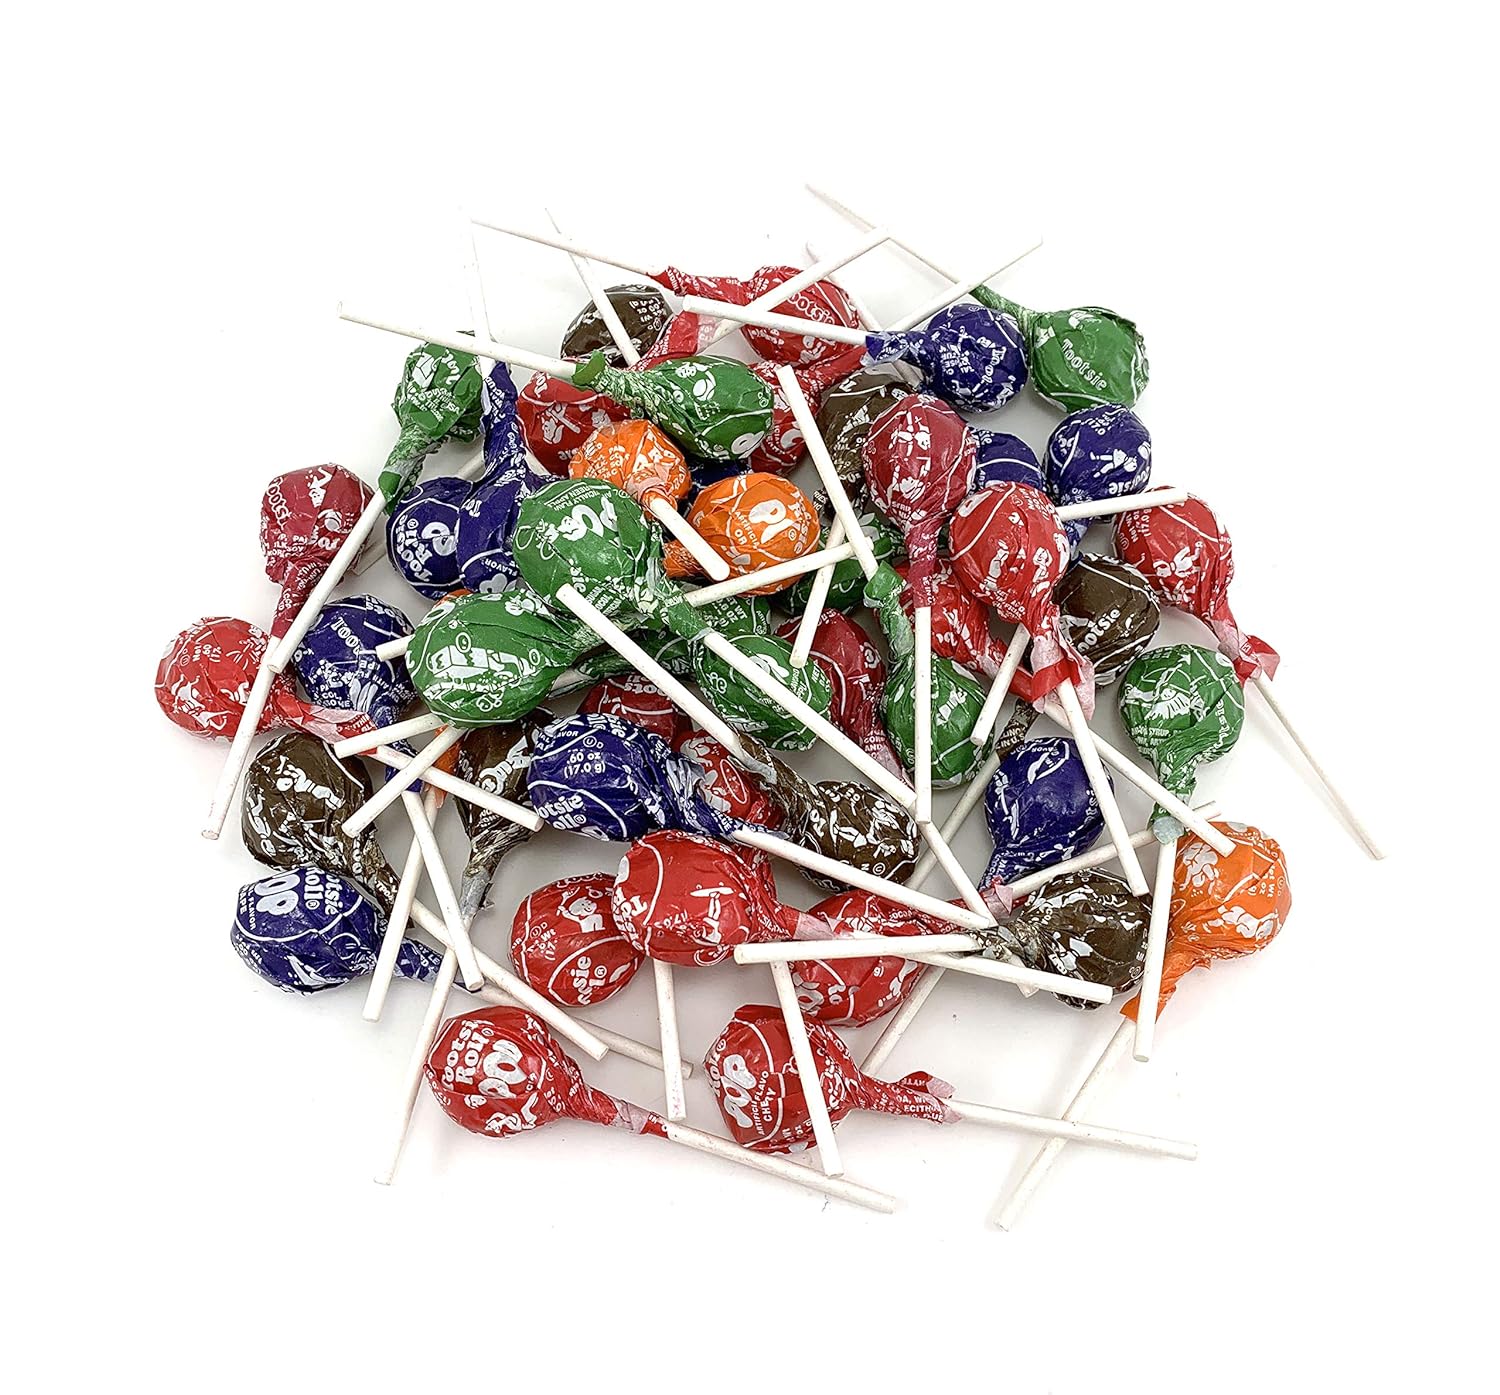  LaetaFood Tootsie Roll Fruit Chew Lollipops, Original Flavors Pops Candy - 2.2 Pound Pack - 55 Count